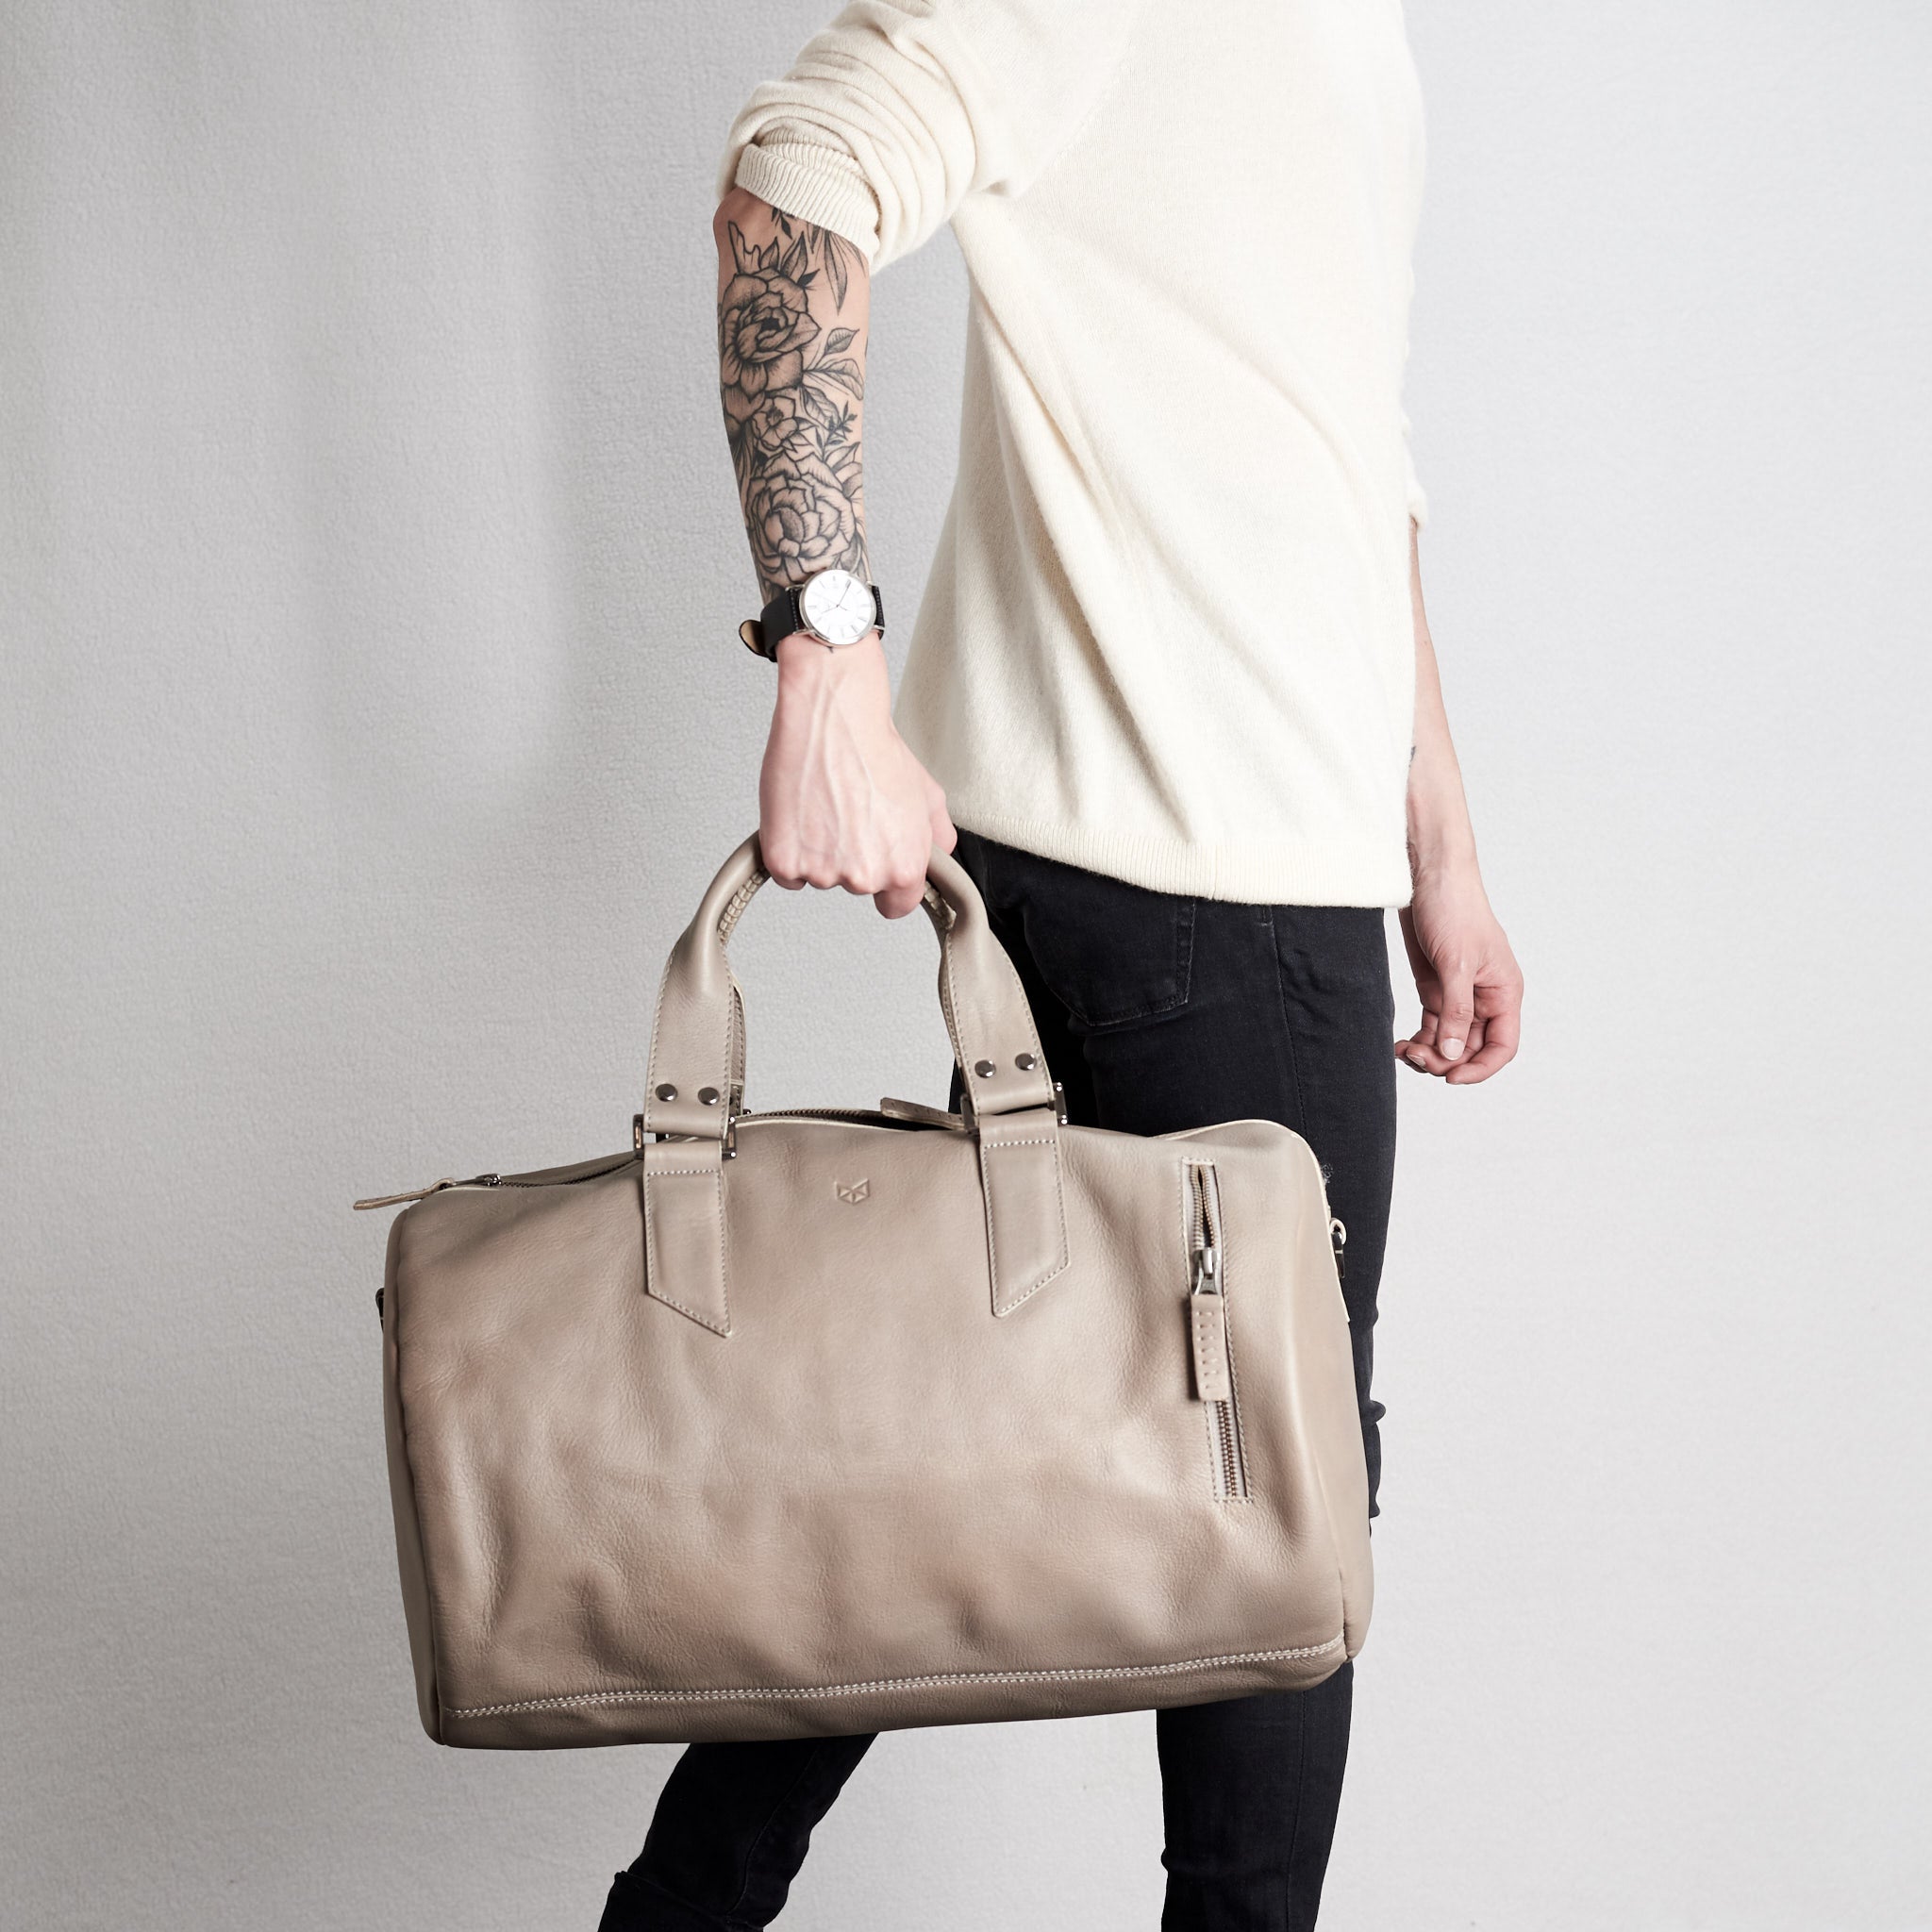 Handmade Substantial Leather Duffle Bag · Grey by Capra - Capra Leather